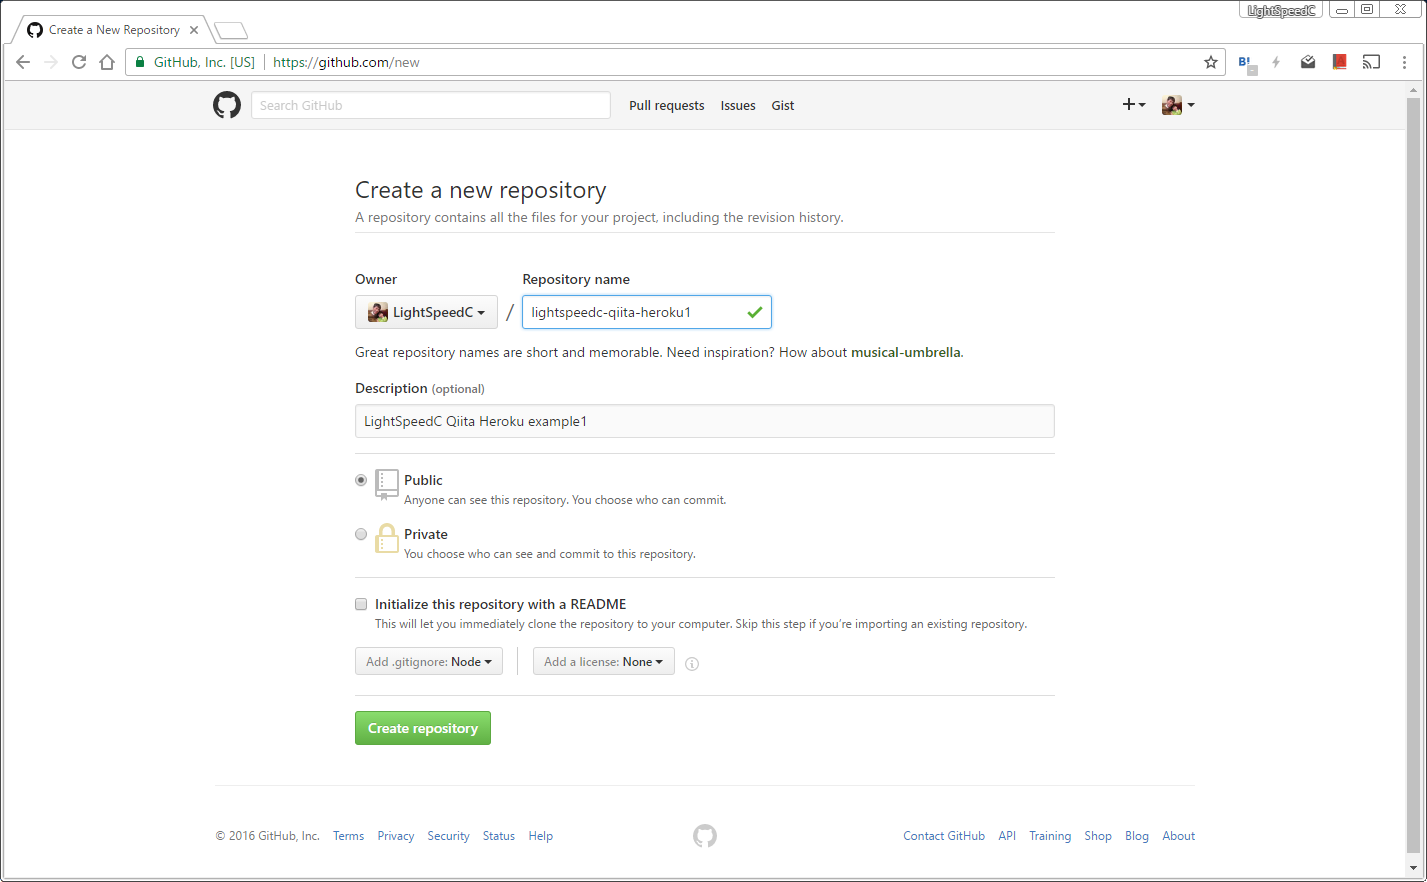 github001-create-new-repository.png